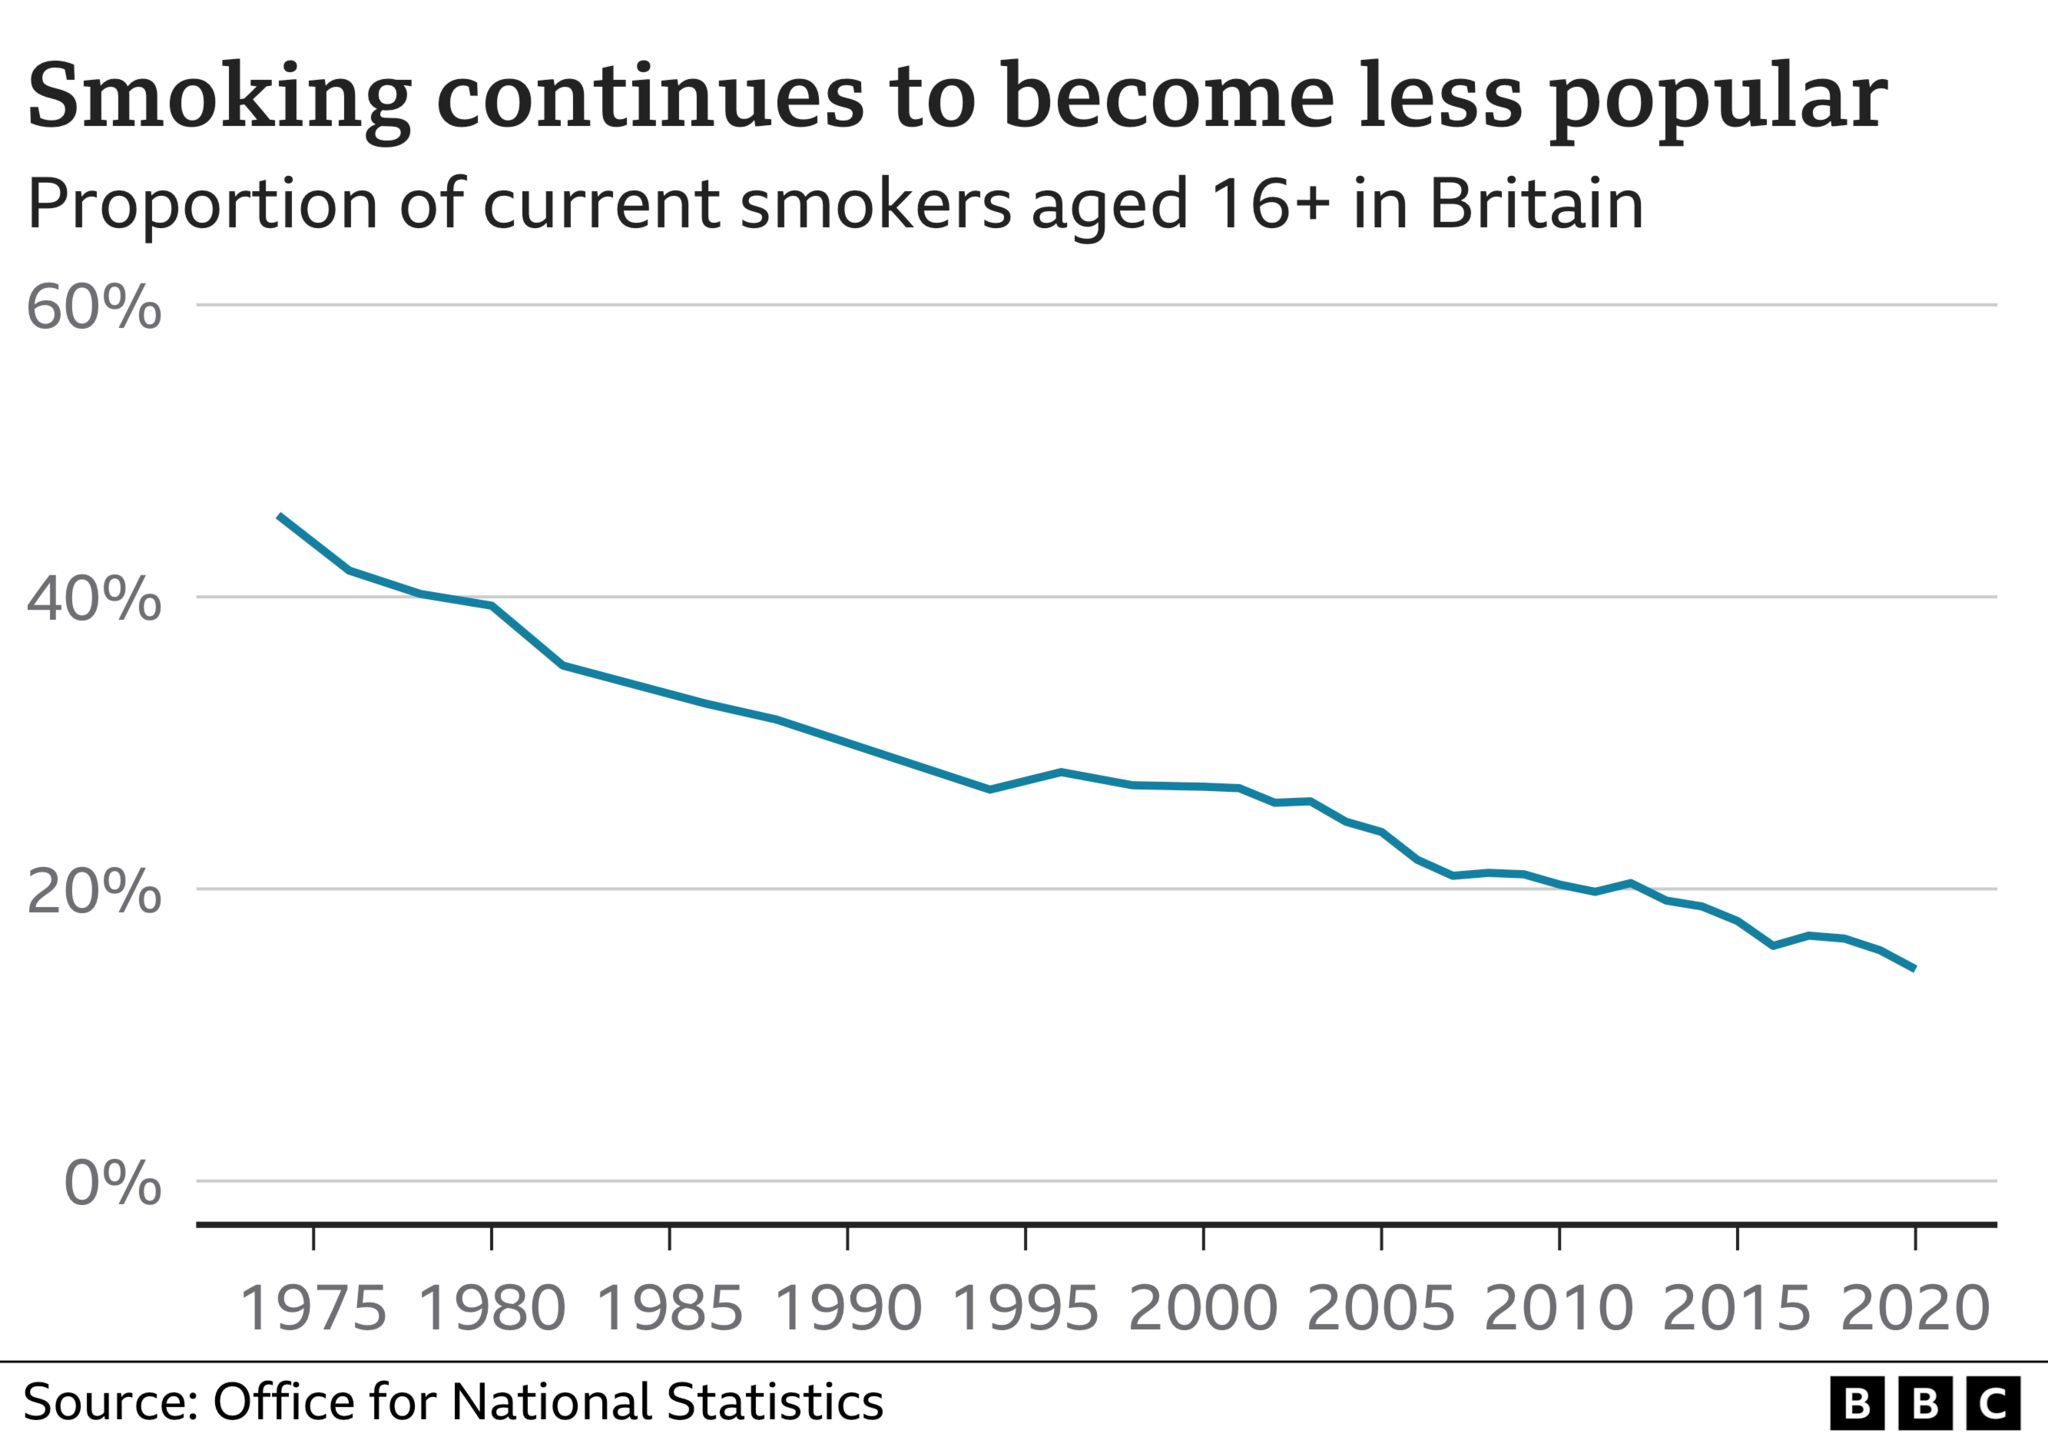 Chart showing smoking rates falling since the 1970s